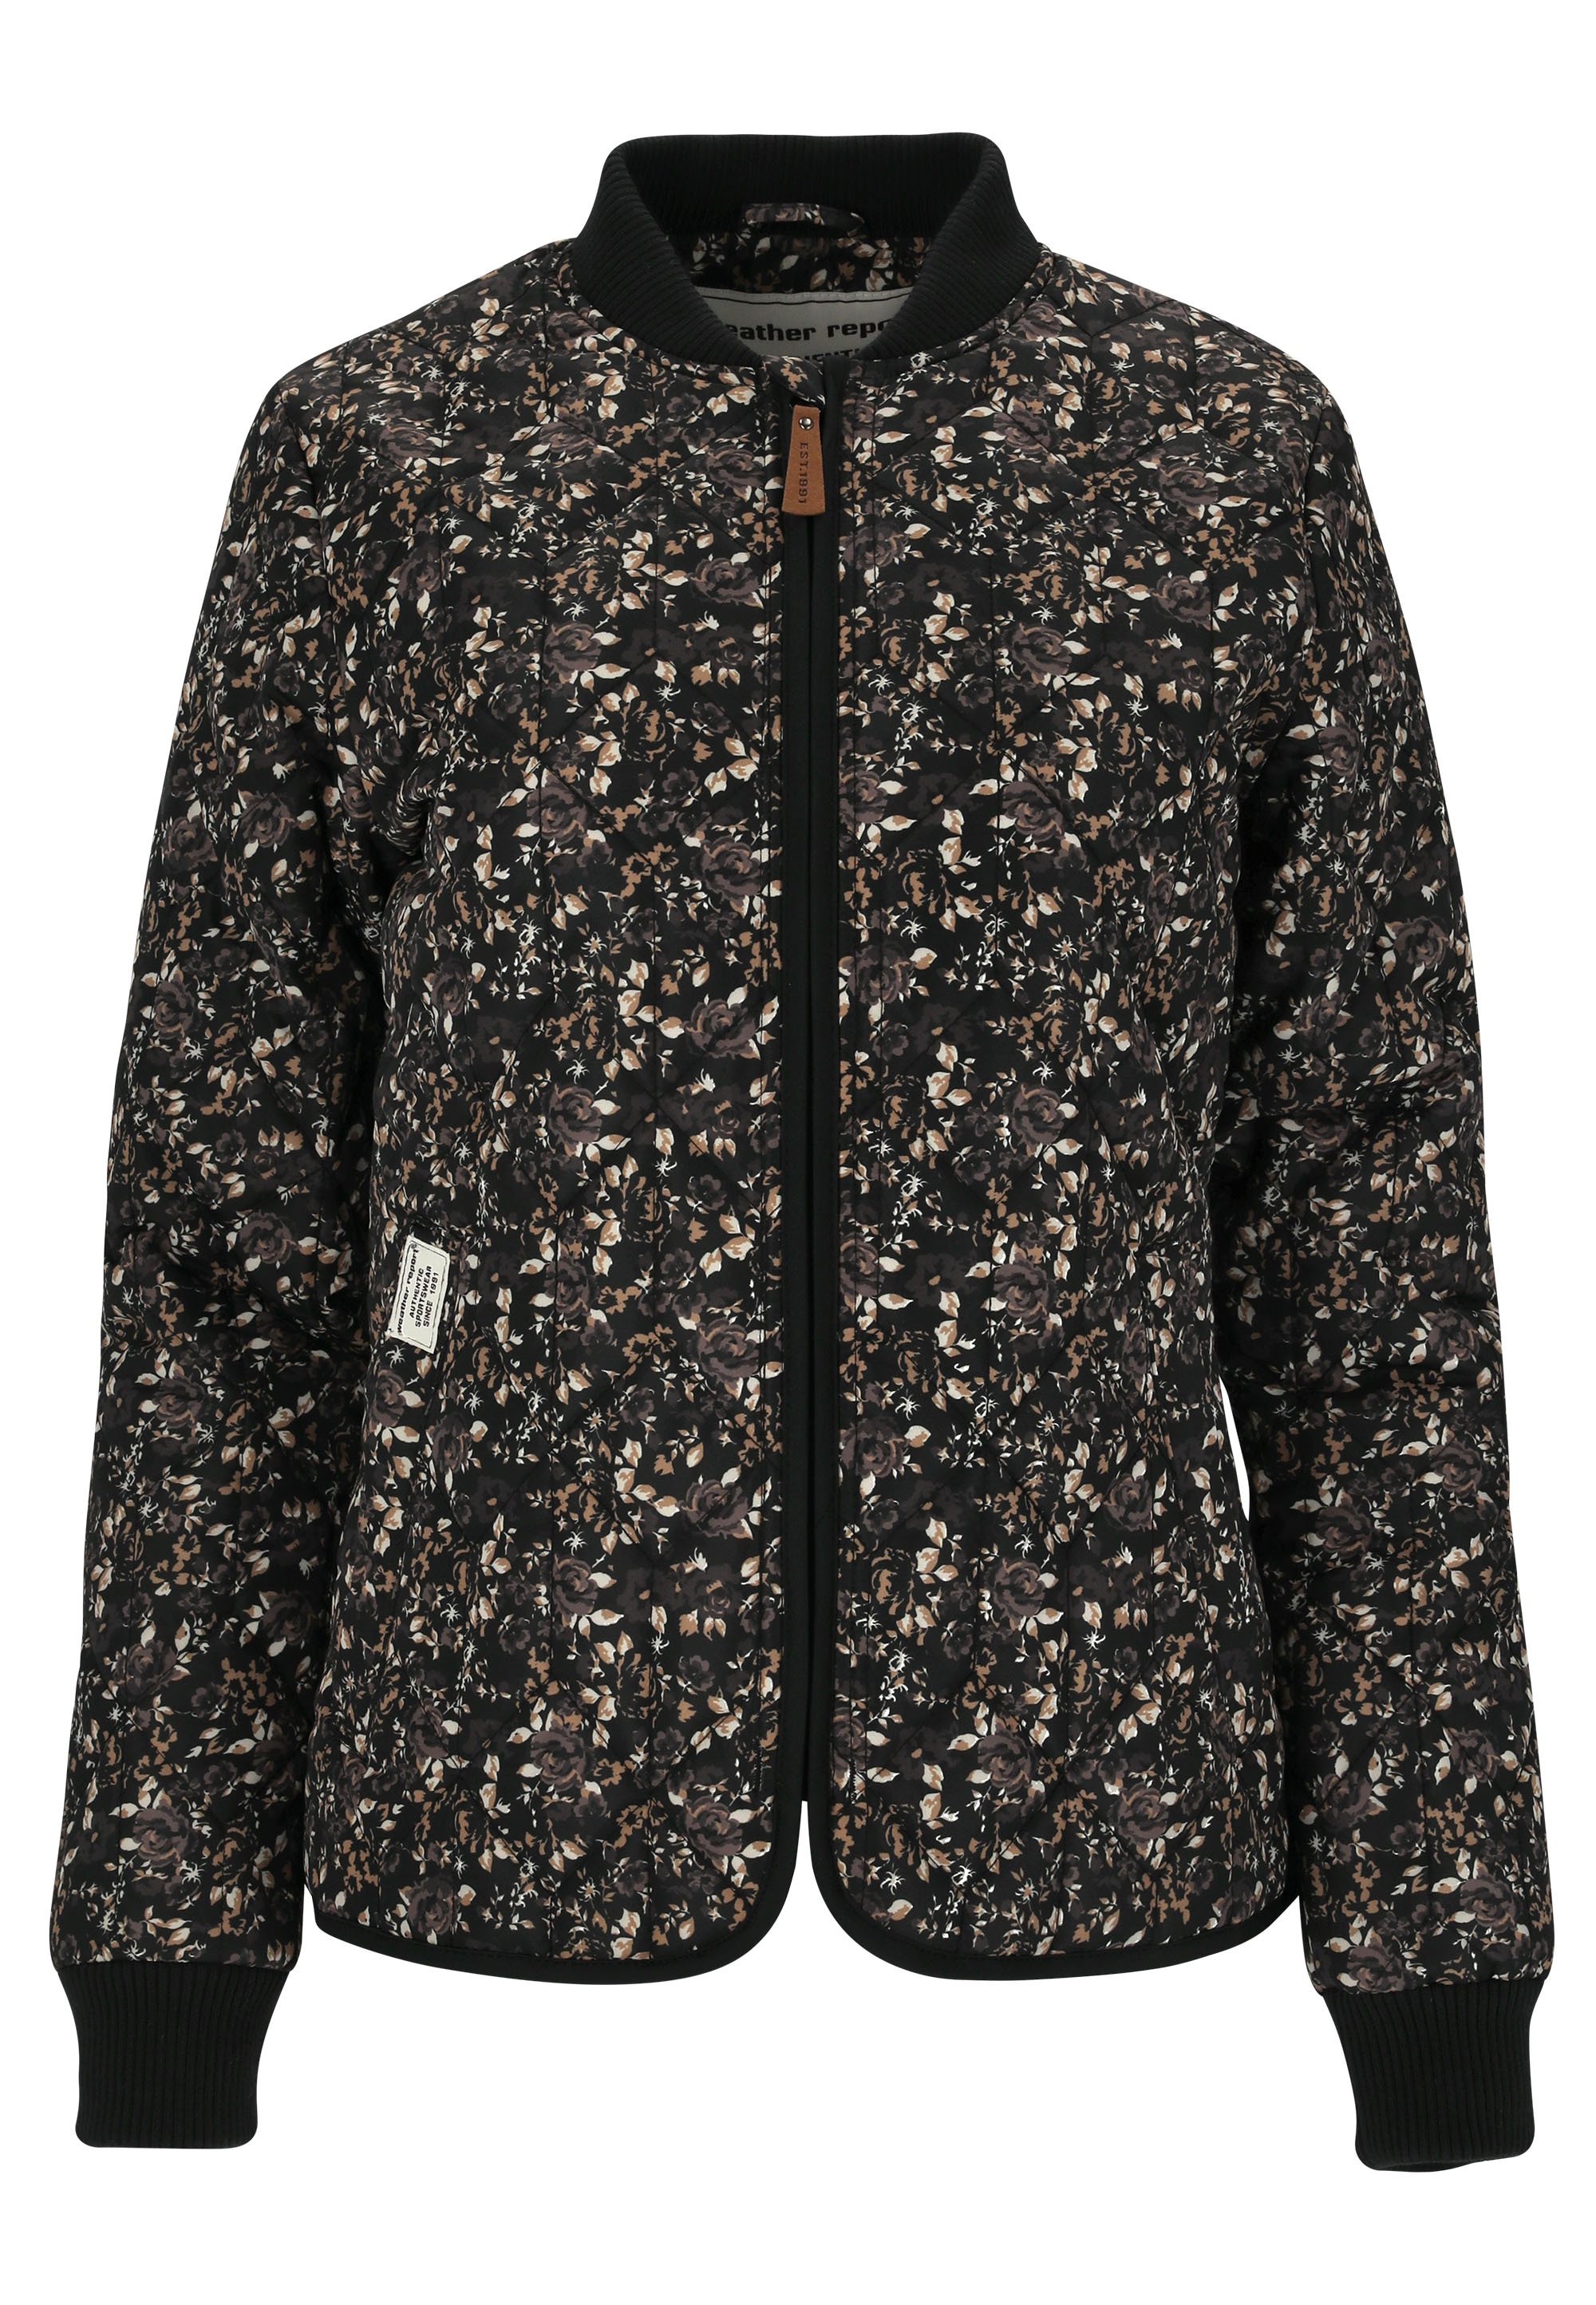 Allover-Muster floralem »Floral«, WEATHER online Outdoorjacke mit REPORT